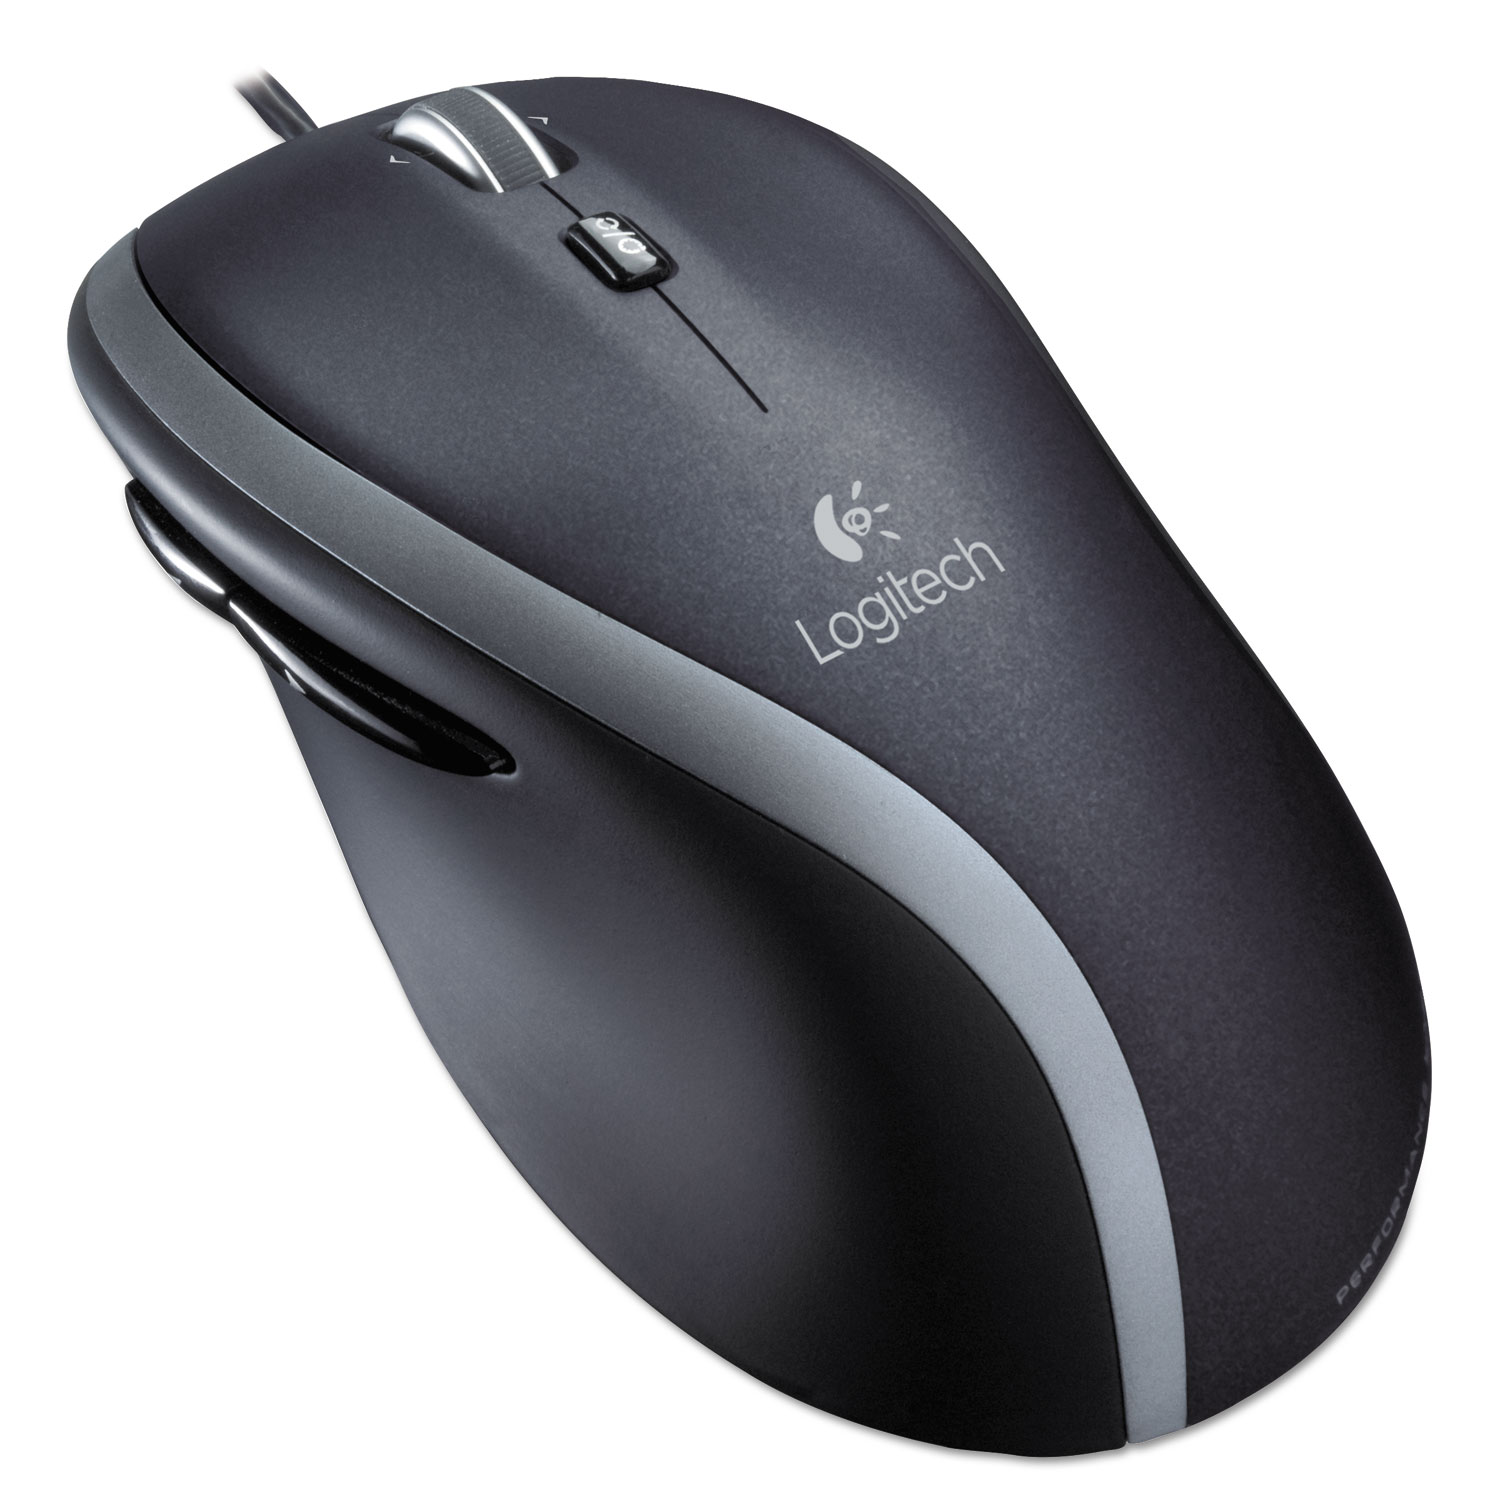  Logitech 910-001204 M500 Corded Mouse, USB 2.0, Right Hand Use, Black/Silver (LOG910001204) 